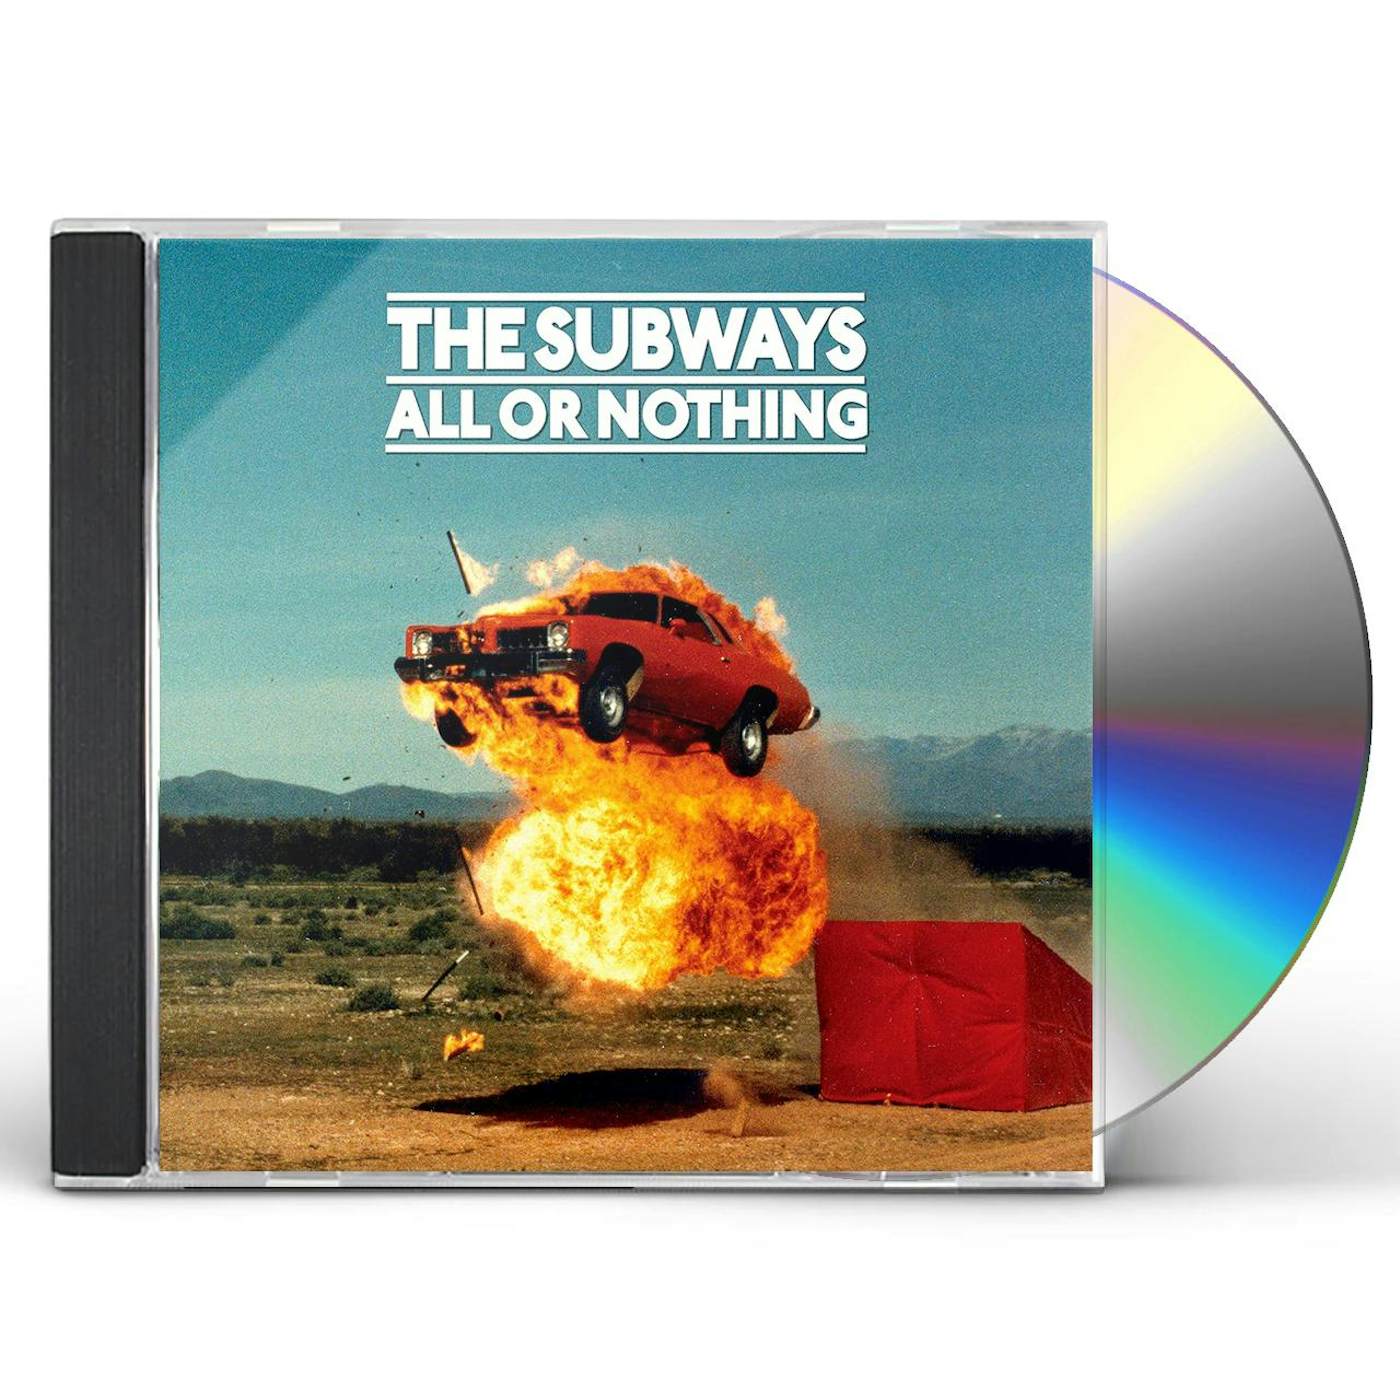 The Subways All Or Nothing CD